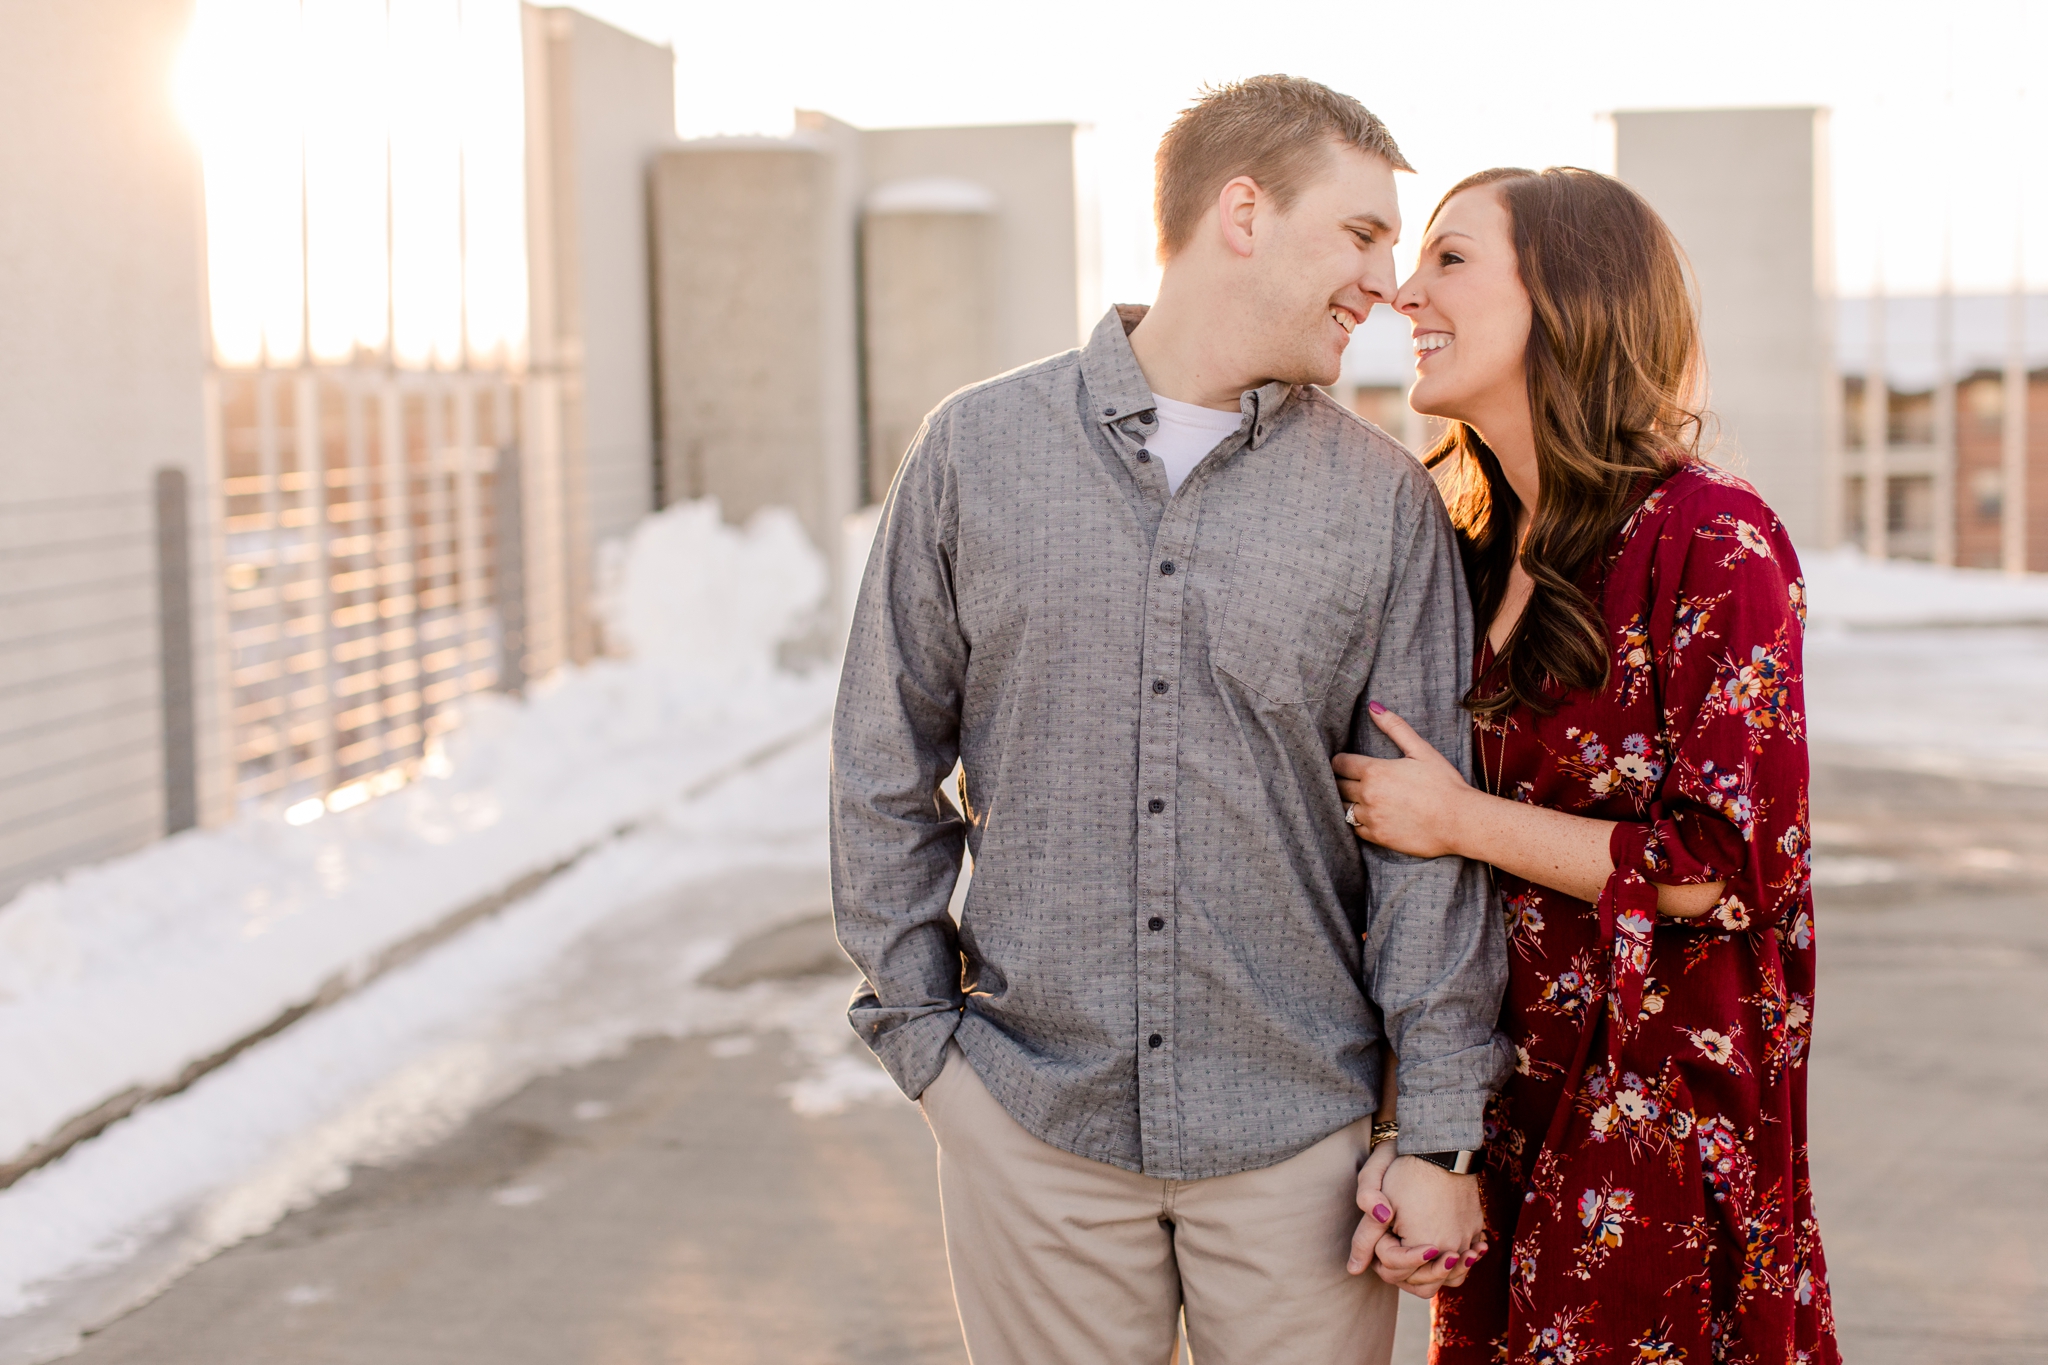 Downtown Fargo Engagement Session, Winter engagement photos, Brittney and Caleb